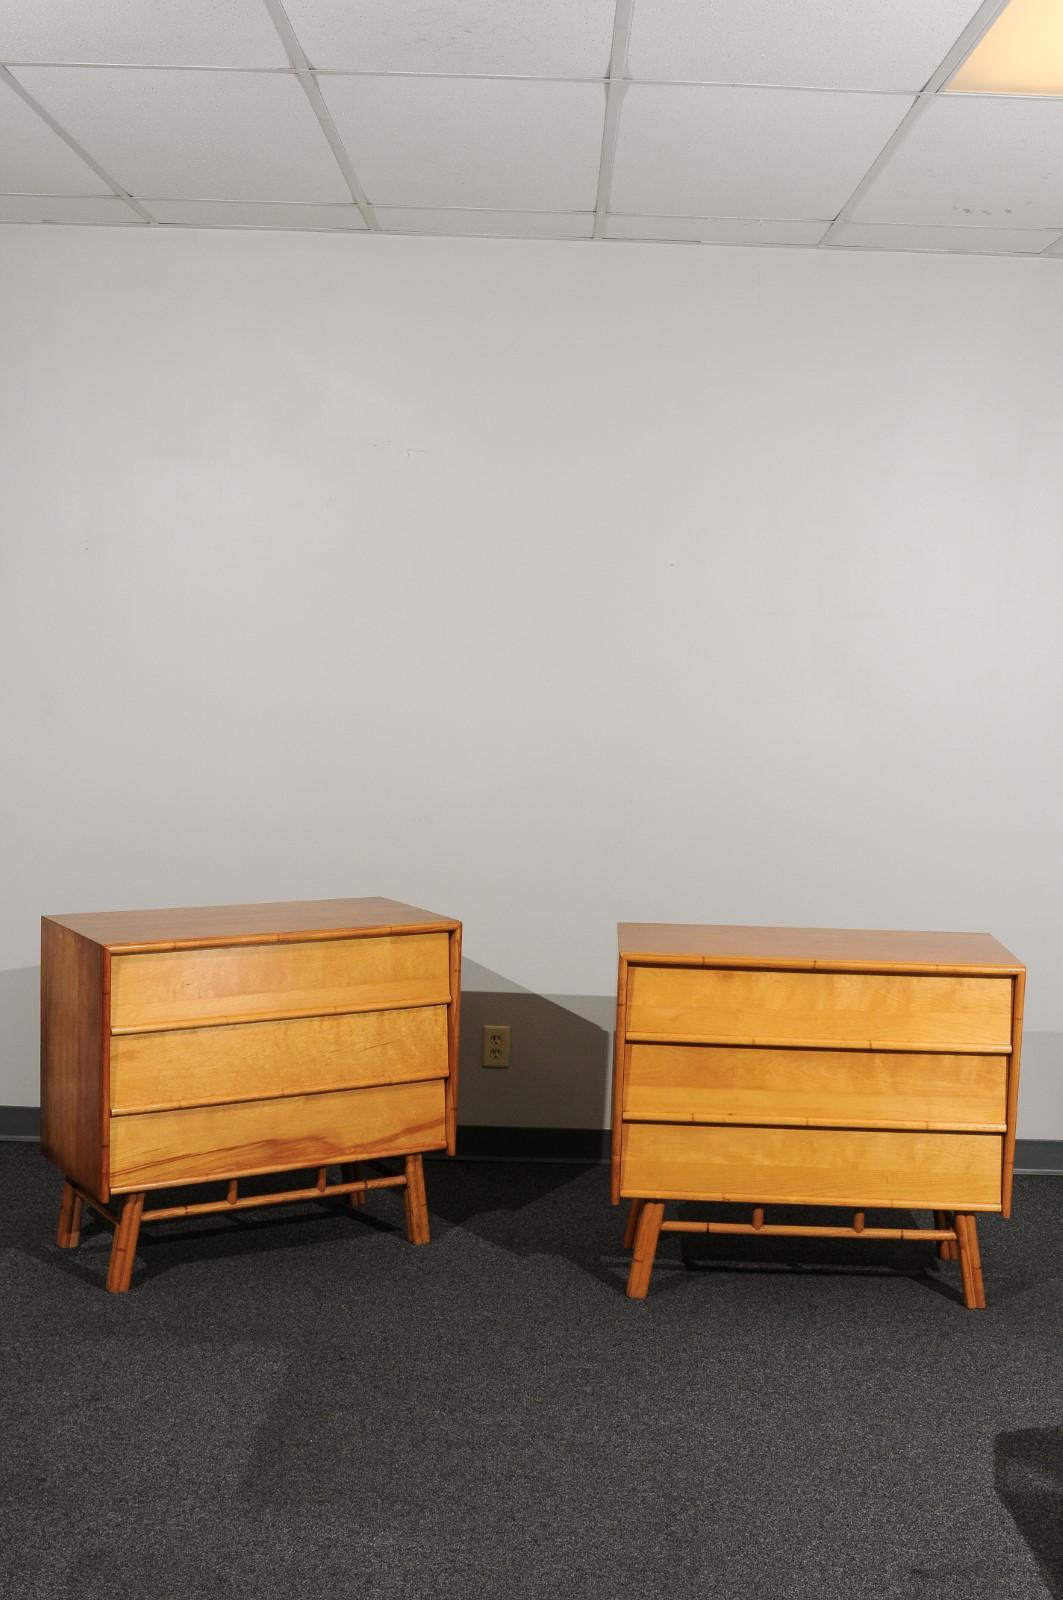 A stunning restored pair of modern chests by John Stuart, circa 1950. The sleek clean design is clearly influenced by the Florence Knoll case production of the same period. Expertly crafted solid maple plank construction. Exquisite Maple case